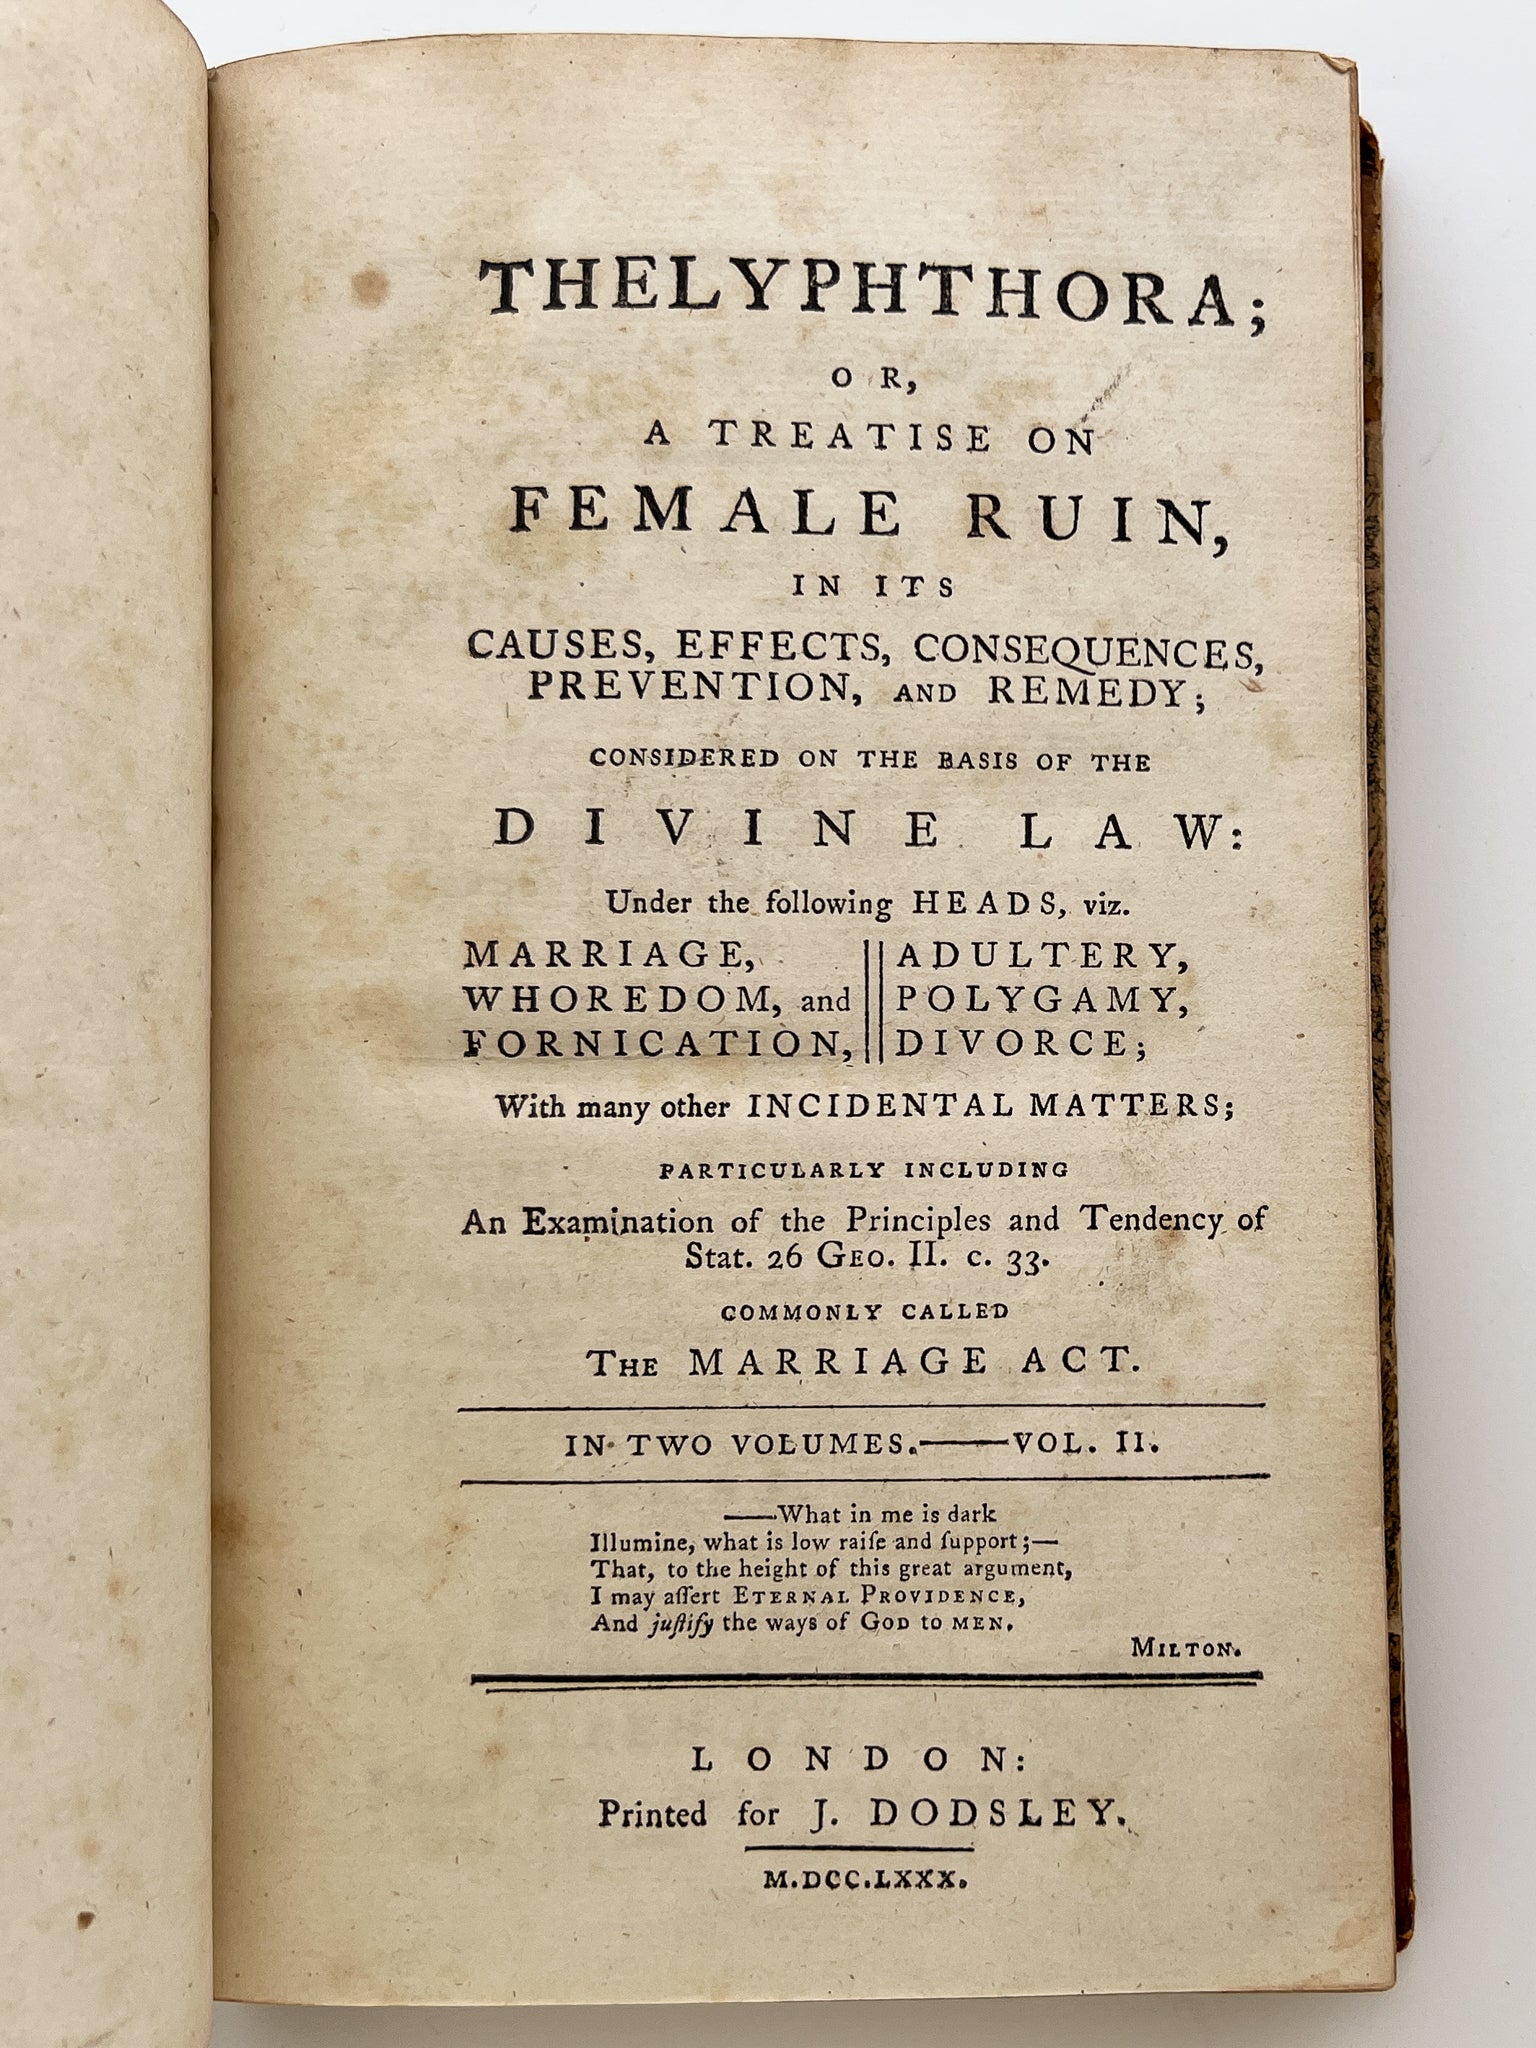 Thelyphthora; or, A Treatise on Female Ruin